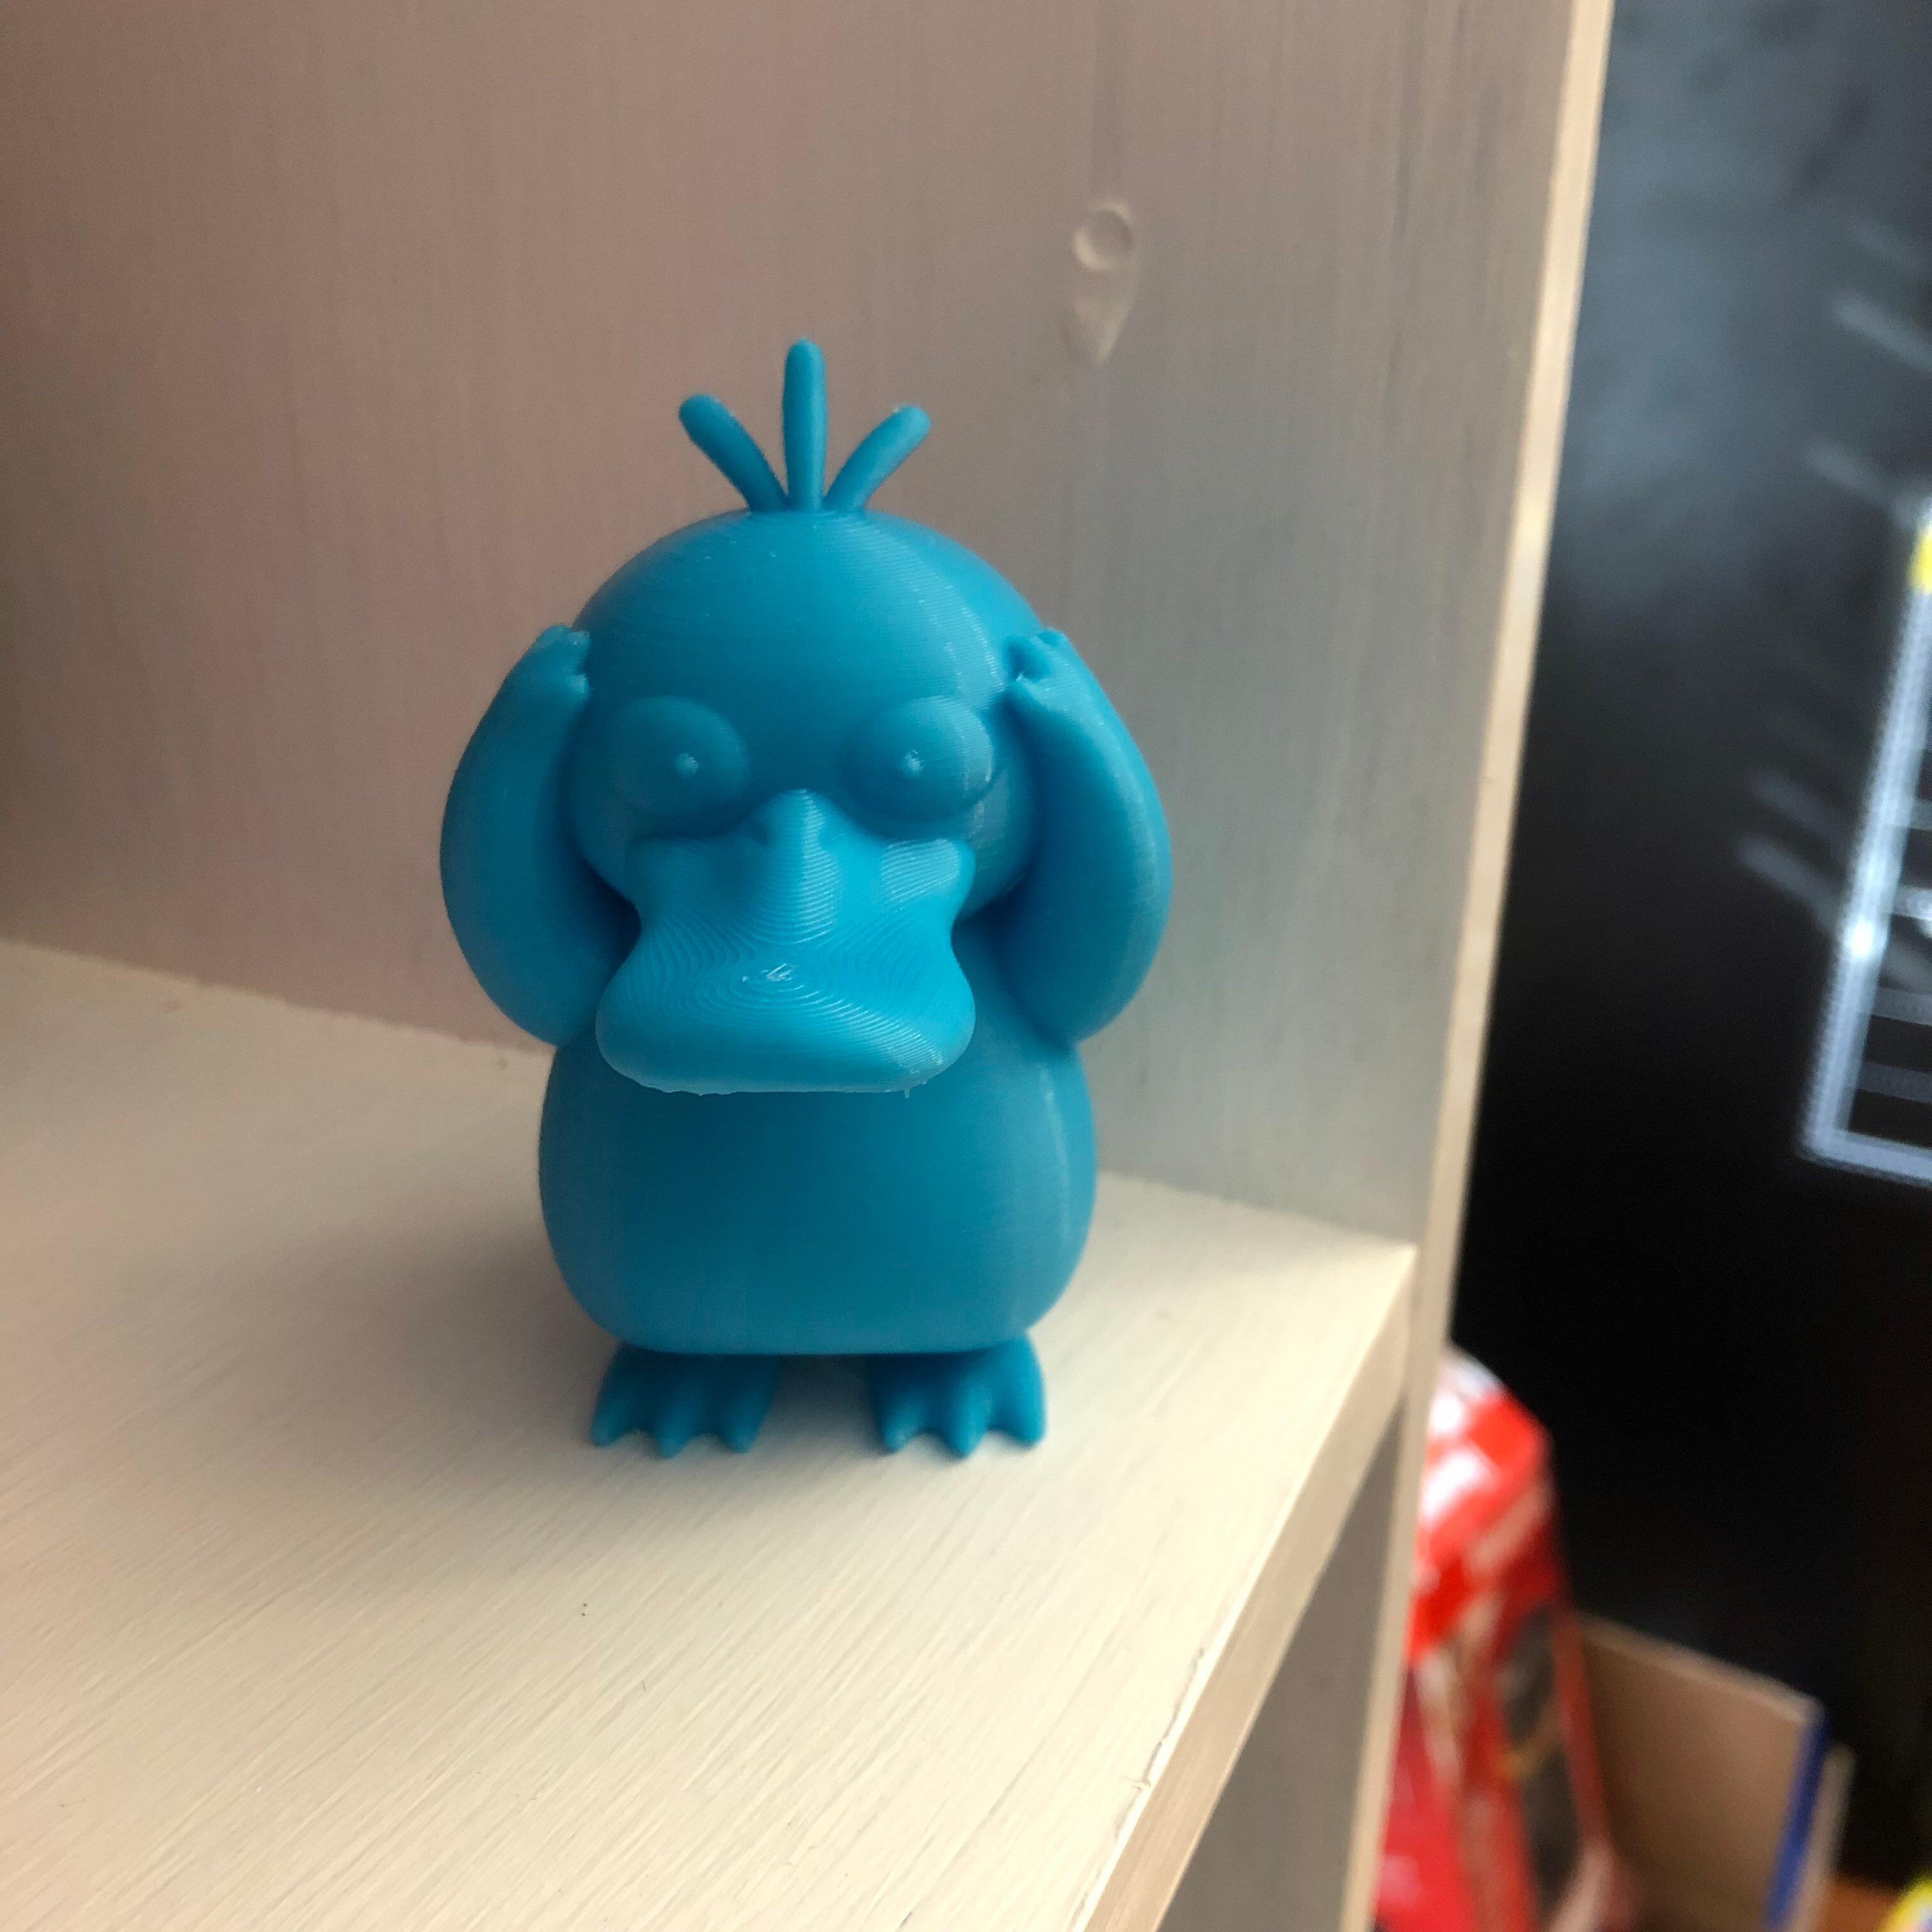 Psyduck (Pokemon) - Printed on Prusa MK3S.  .2mm layer height with a .4mm nozzle. Printed in Matterhackers Light Blue PLA. 
 - 3d model